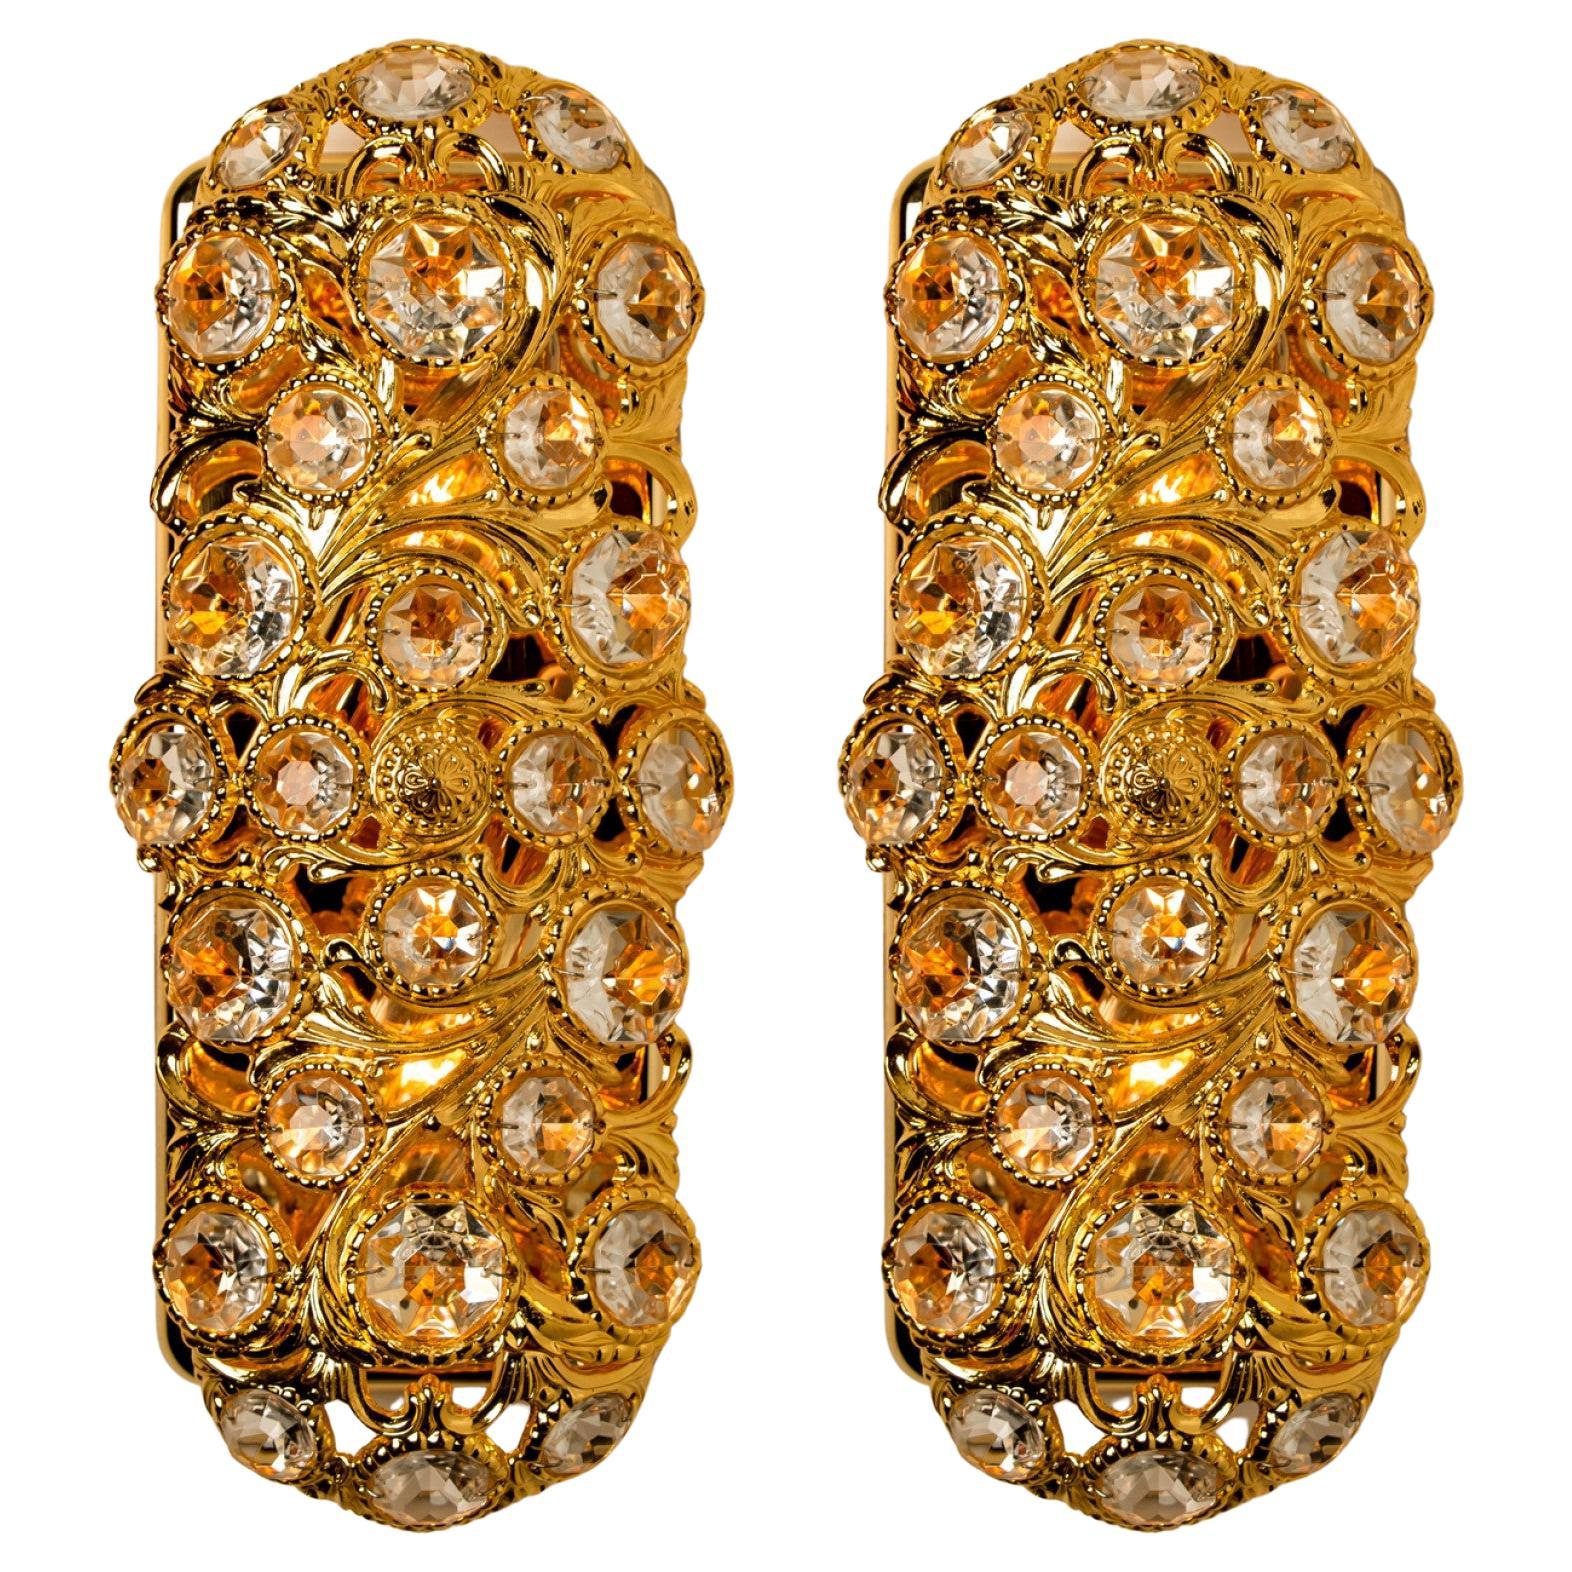 Peris Andreu Gold Toned Crystal Sconces, Spain, 1960 For Sale